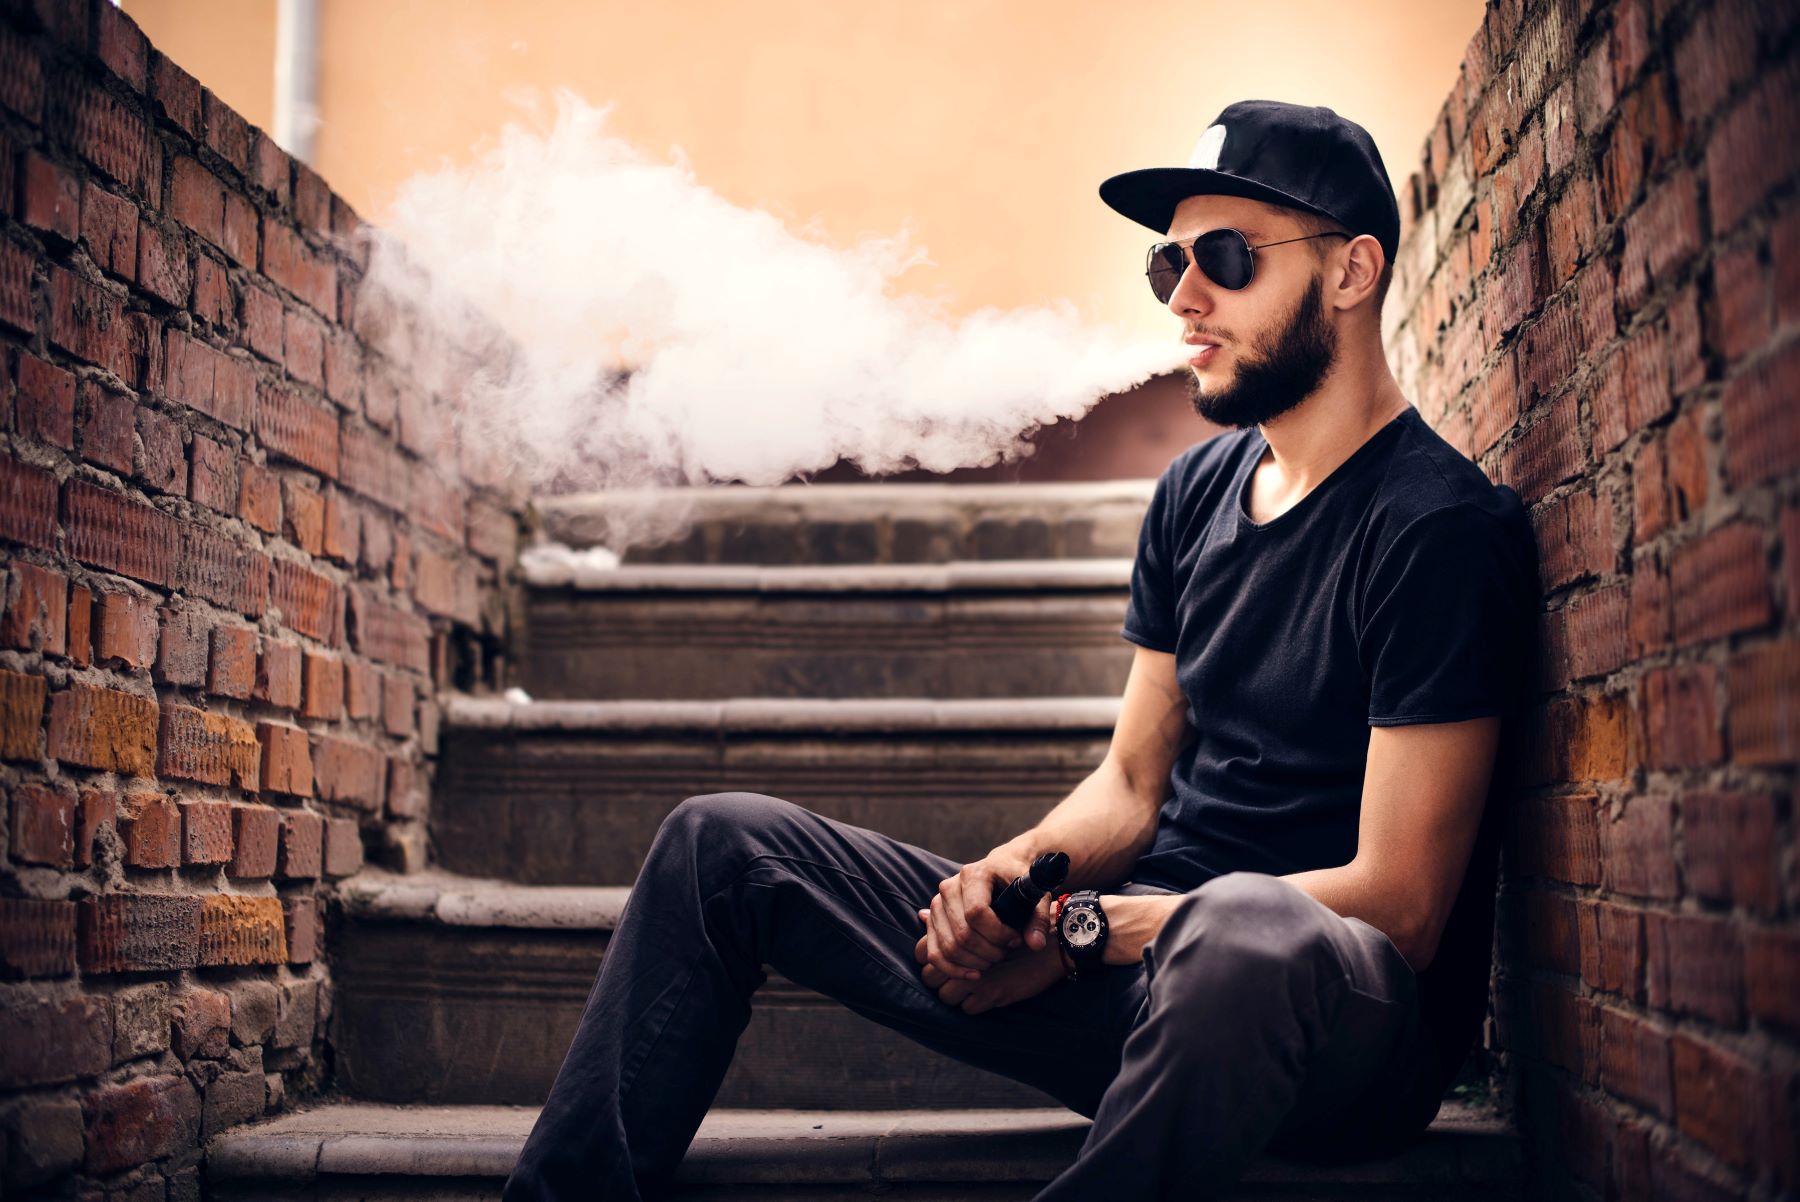 Man in sunglasses and hat exhaling vape sitting on brick steps